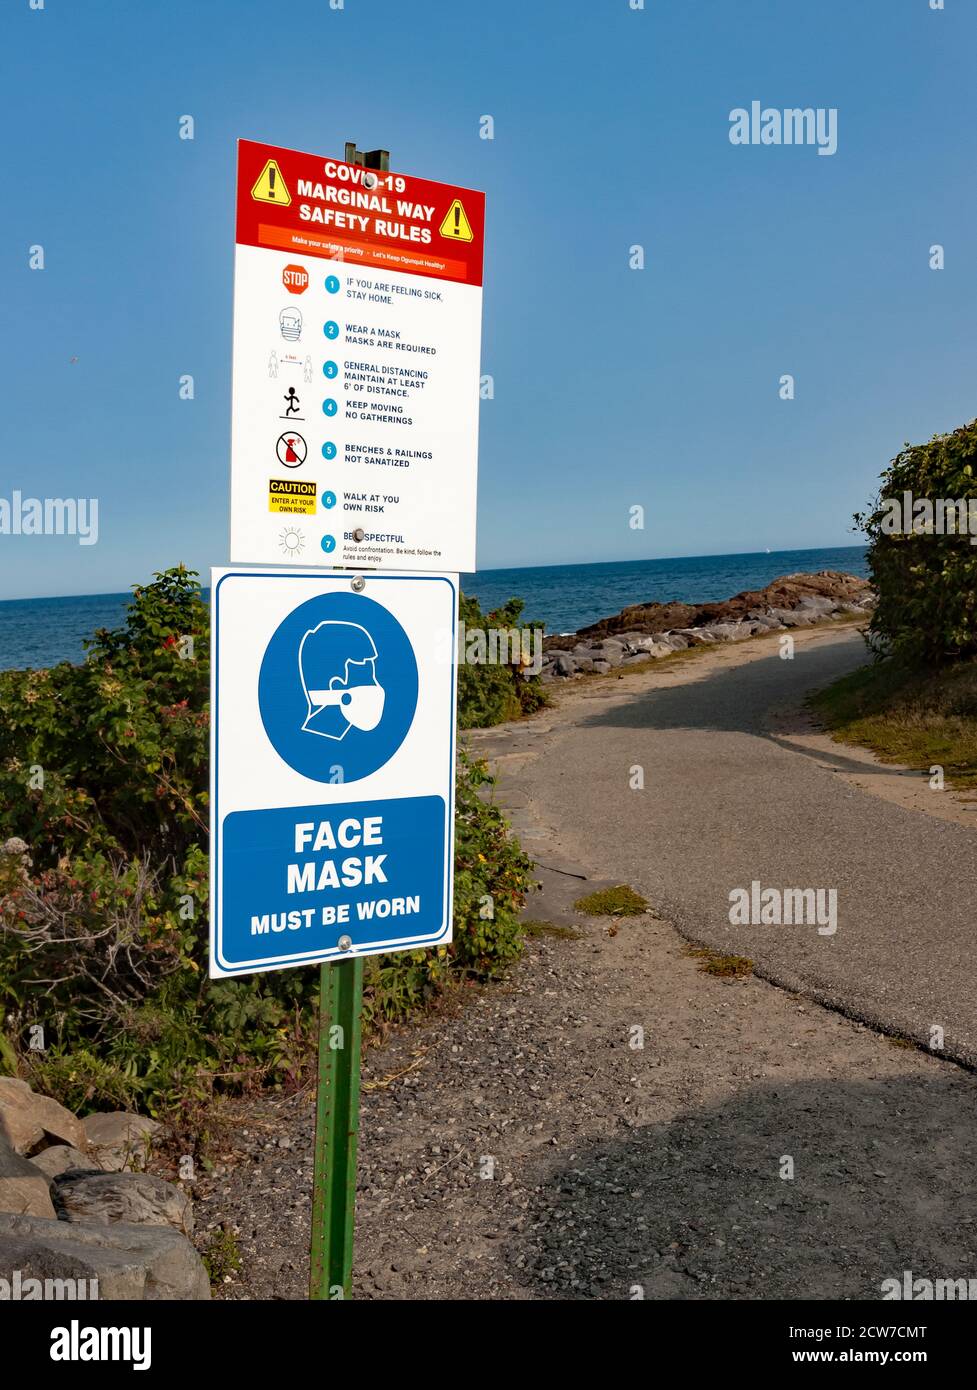 Sign Requiring Face Mask to be Worn Along Marginal Way Scenic Trail in Ogunquit, Maine. Stock Photo